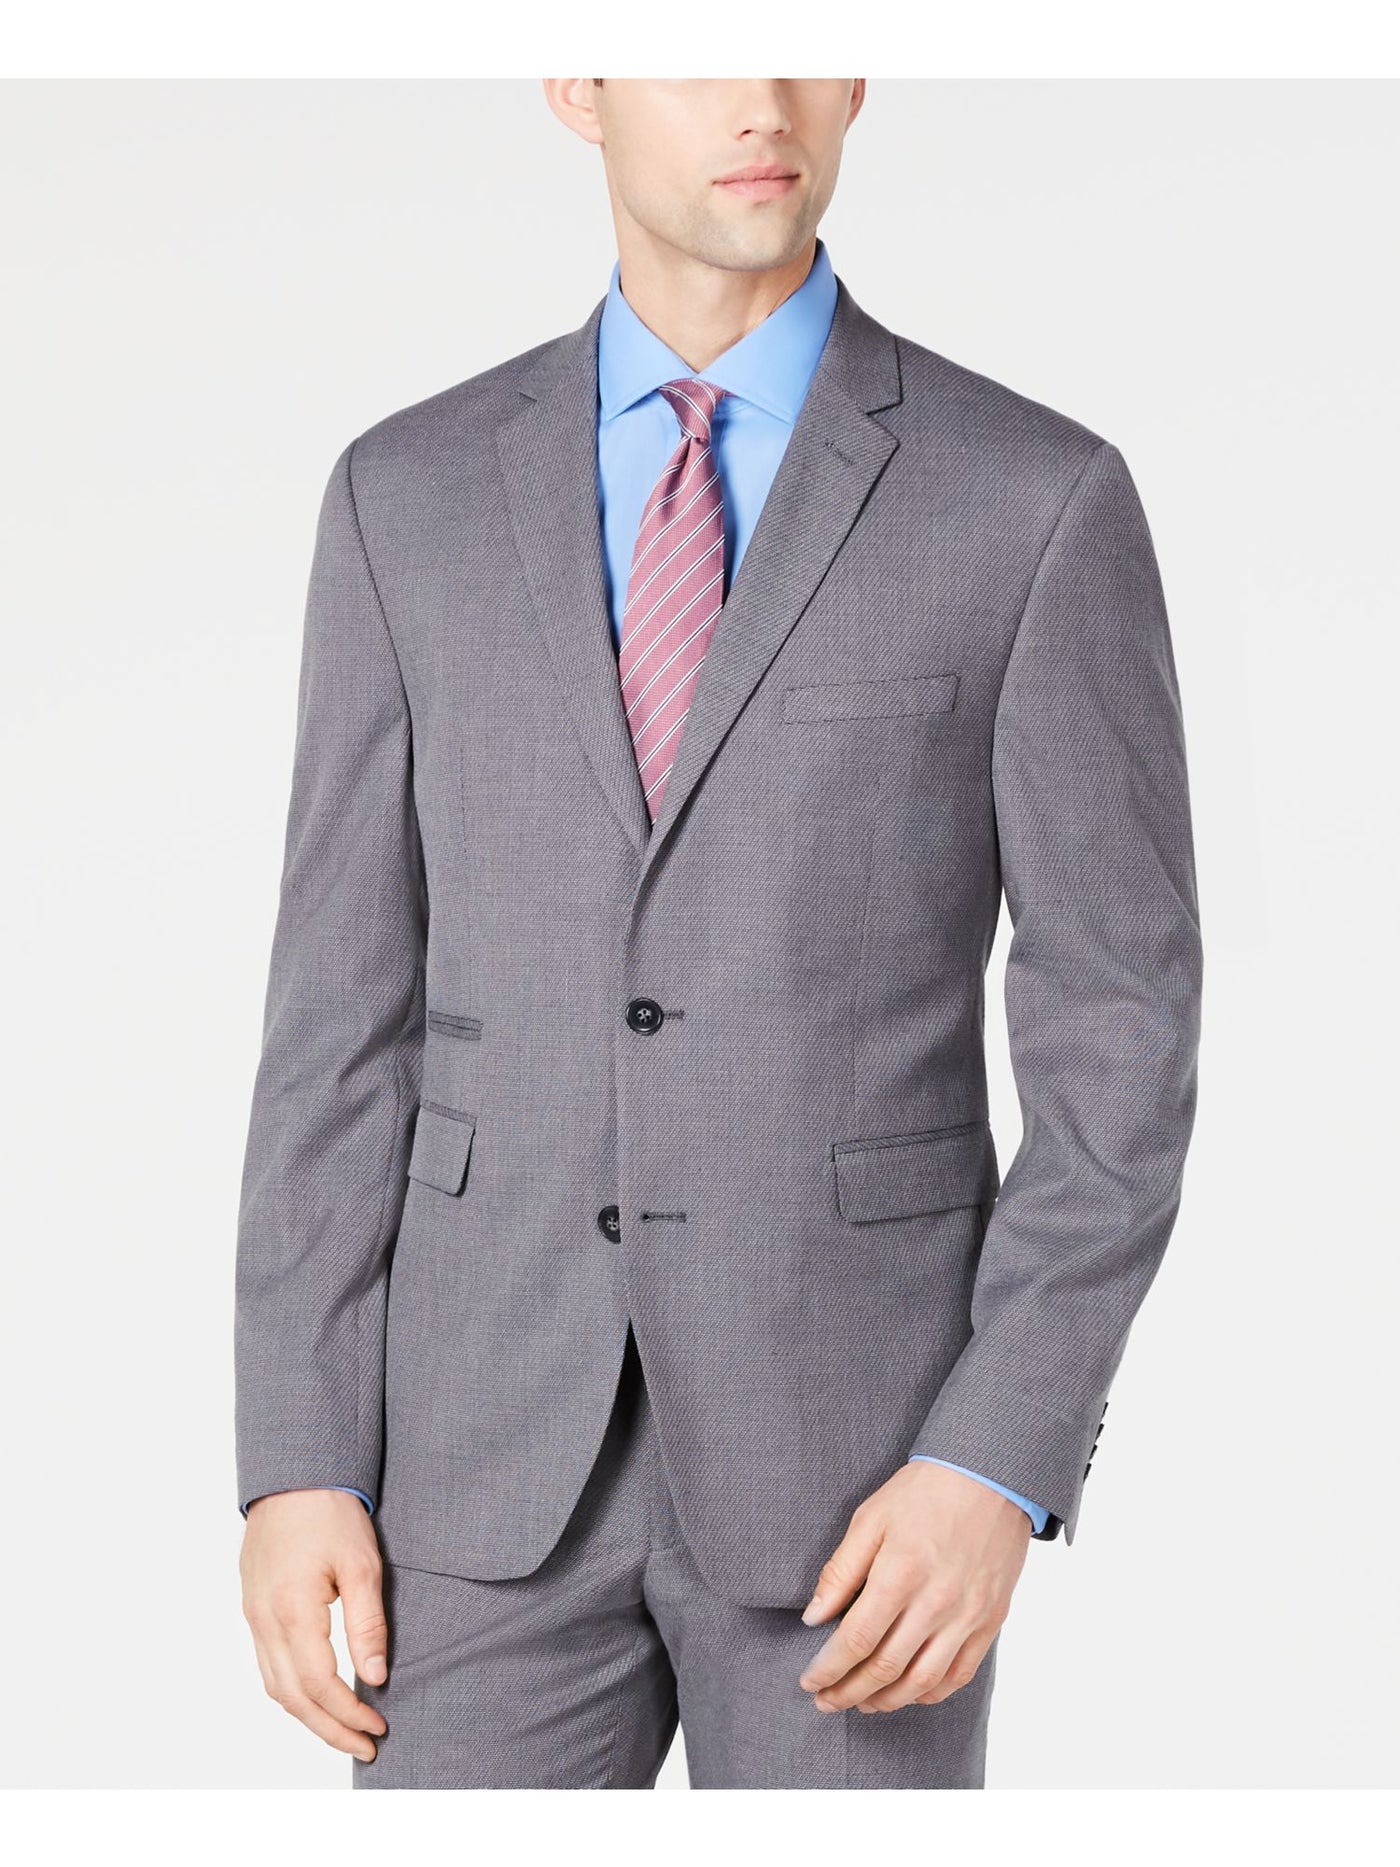 VINCE CAMUTO Mens Gray Single Breasted, Stretch, Slim Fit Wrinkle Resistant Suit Separate Blazer Jacket 36S